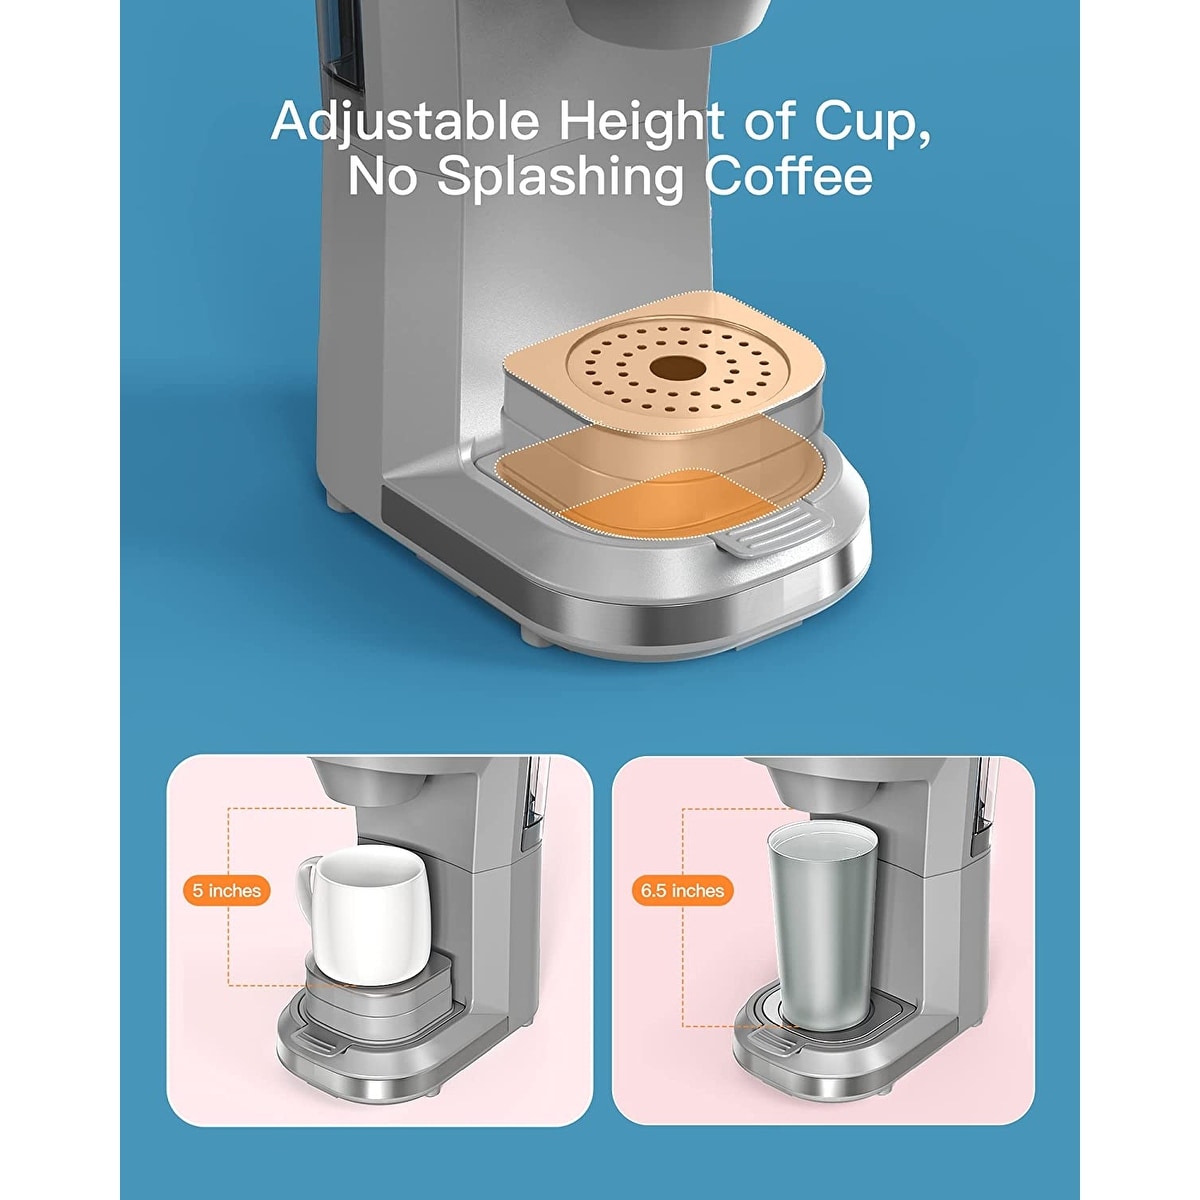 Hot and Iced Coffee Maker for K Cups and Ground Coffee Brewer